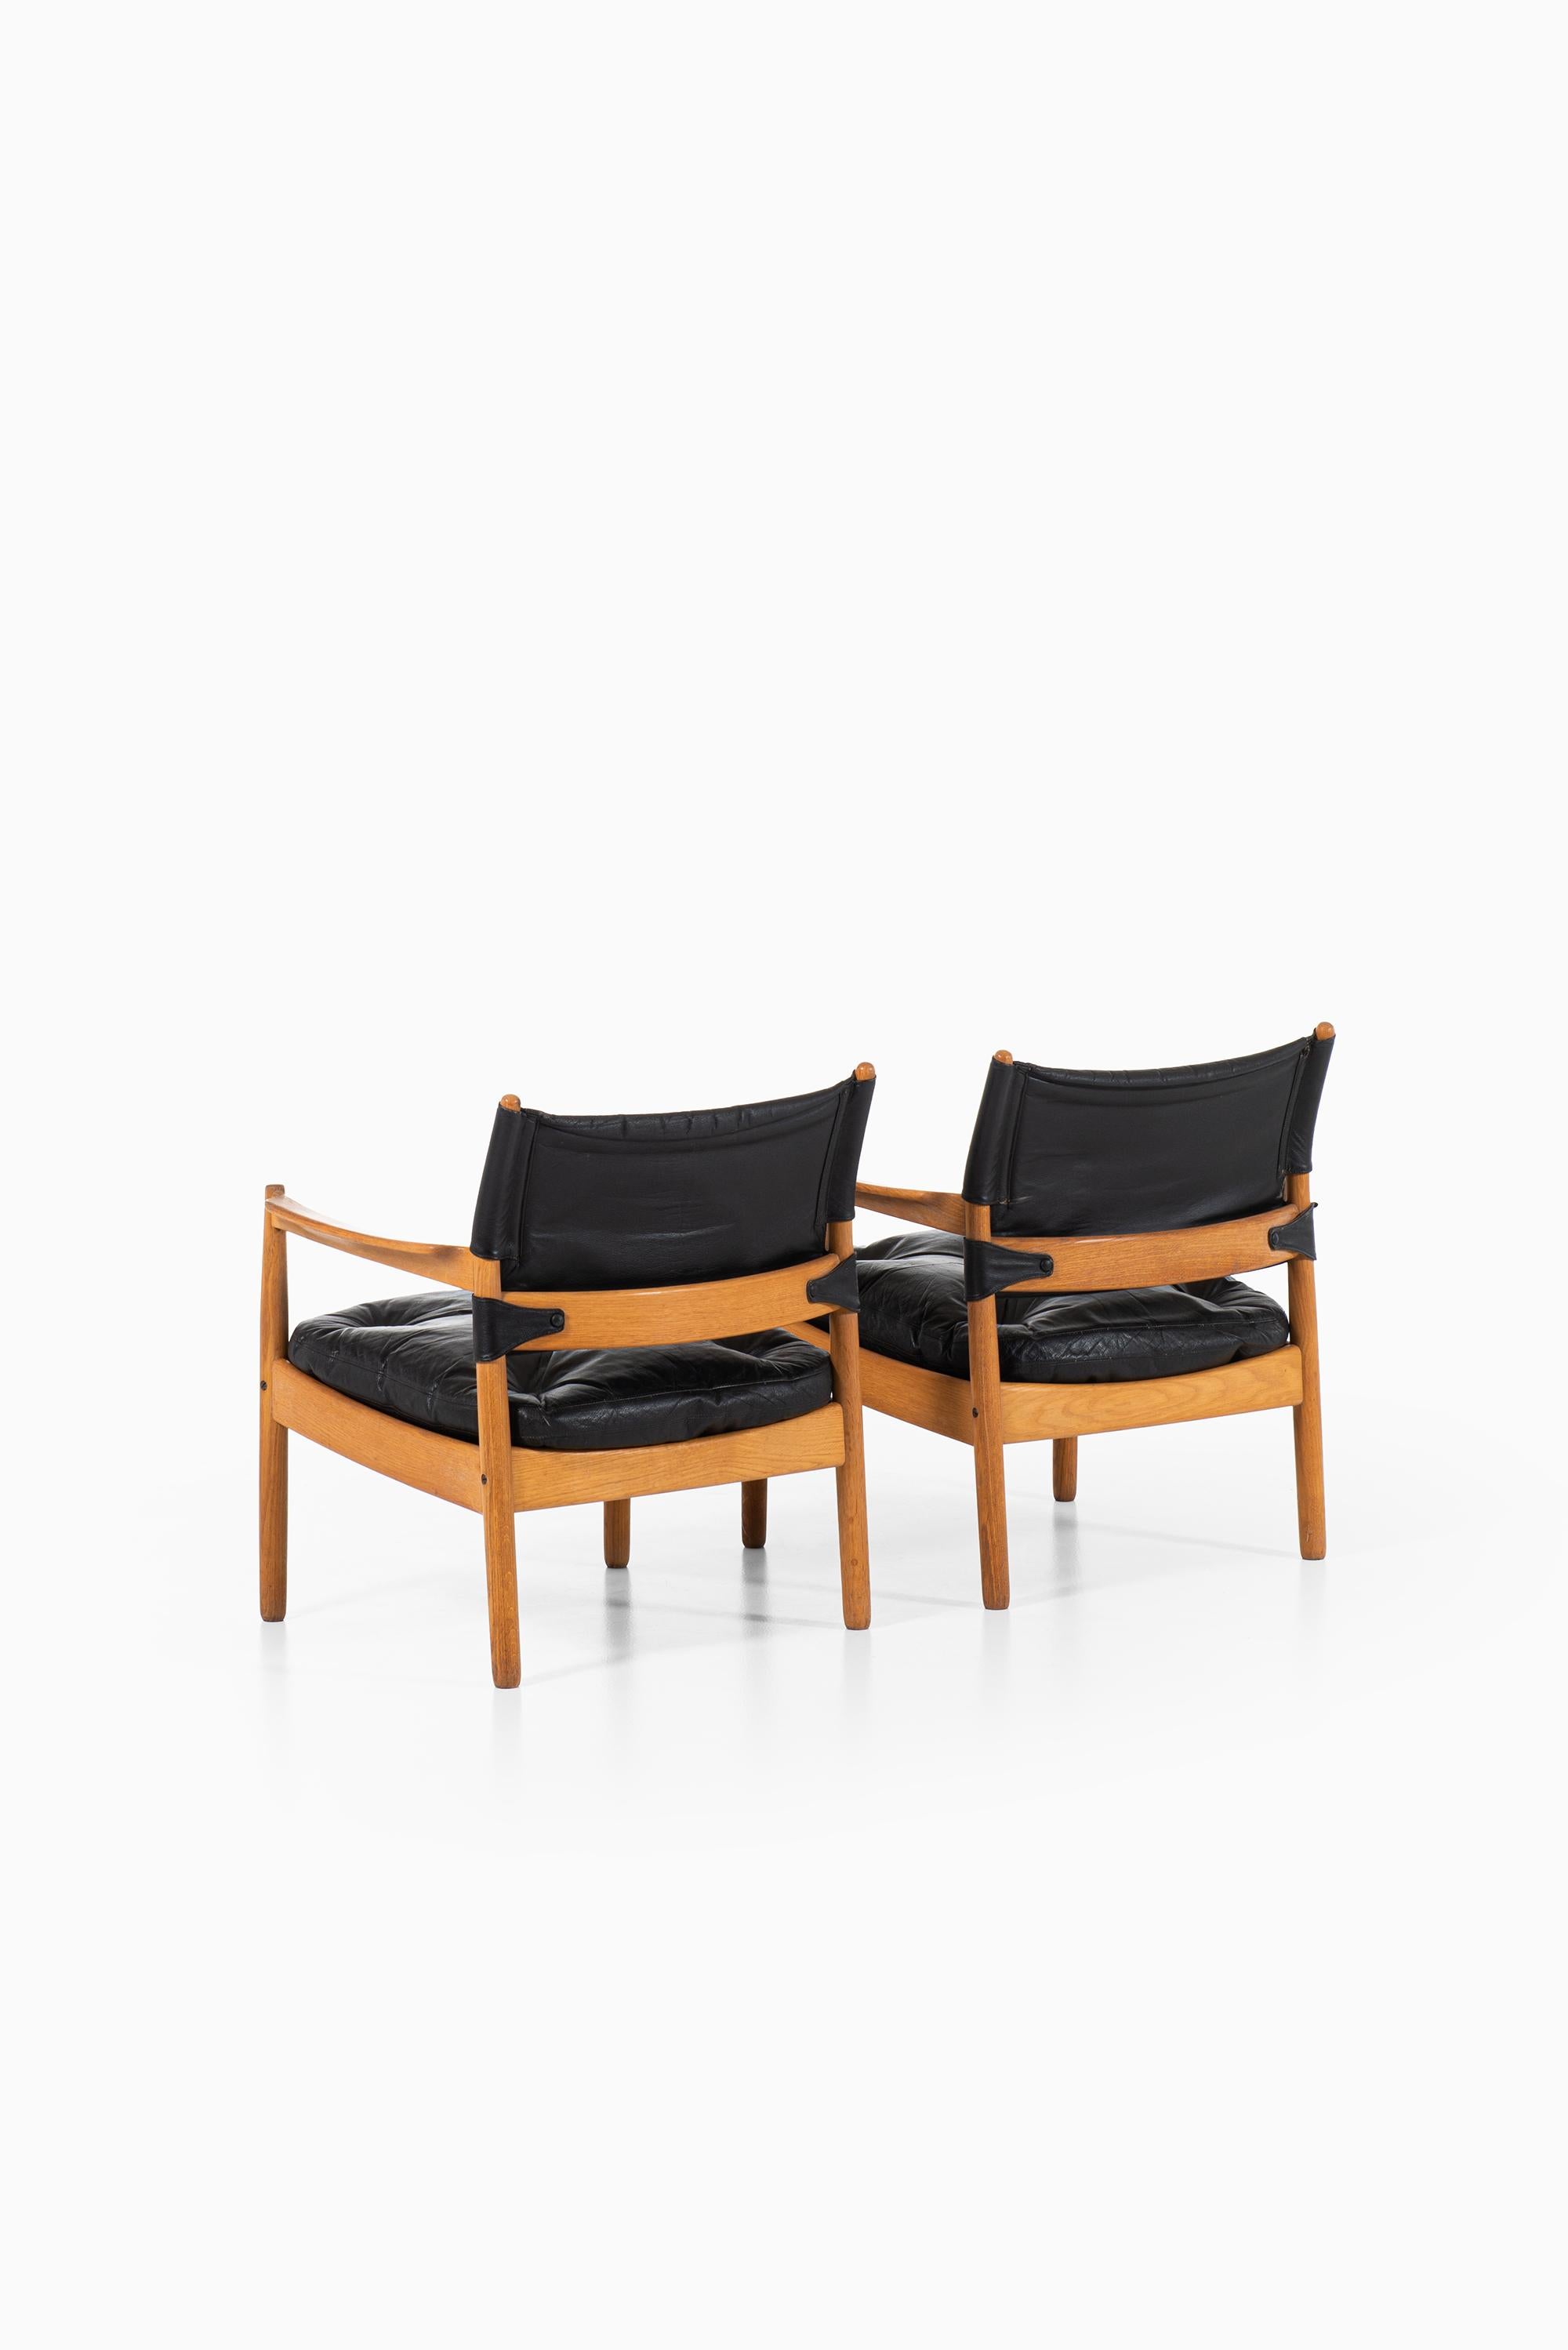 Swedish Gunnar Myrstrand Easy Chairs Produced by Källemo in Sweden